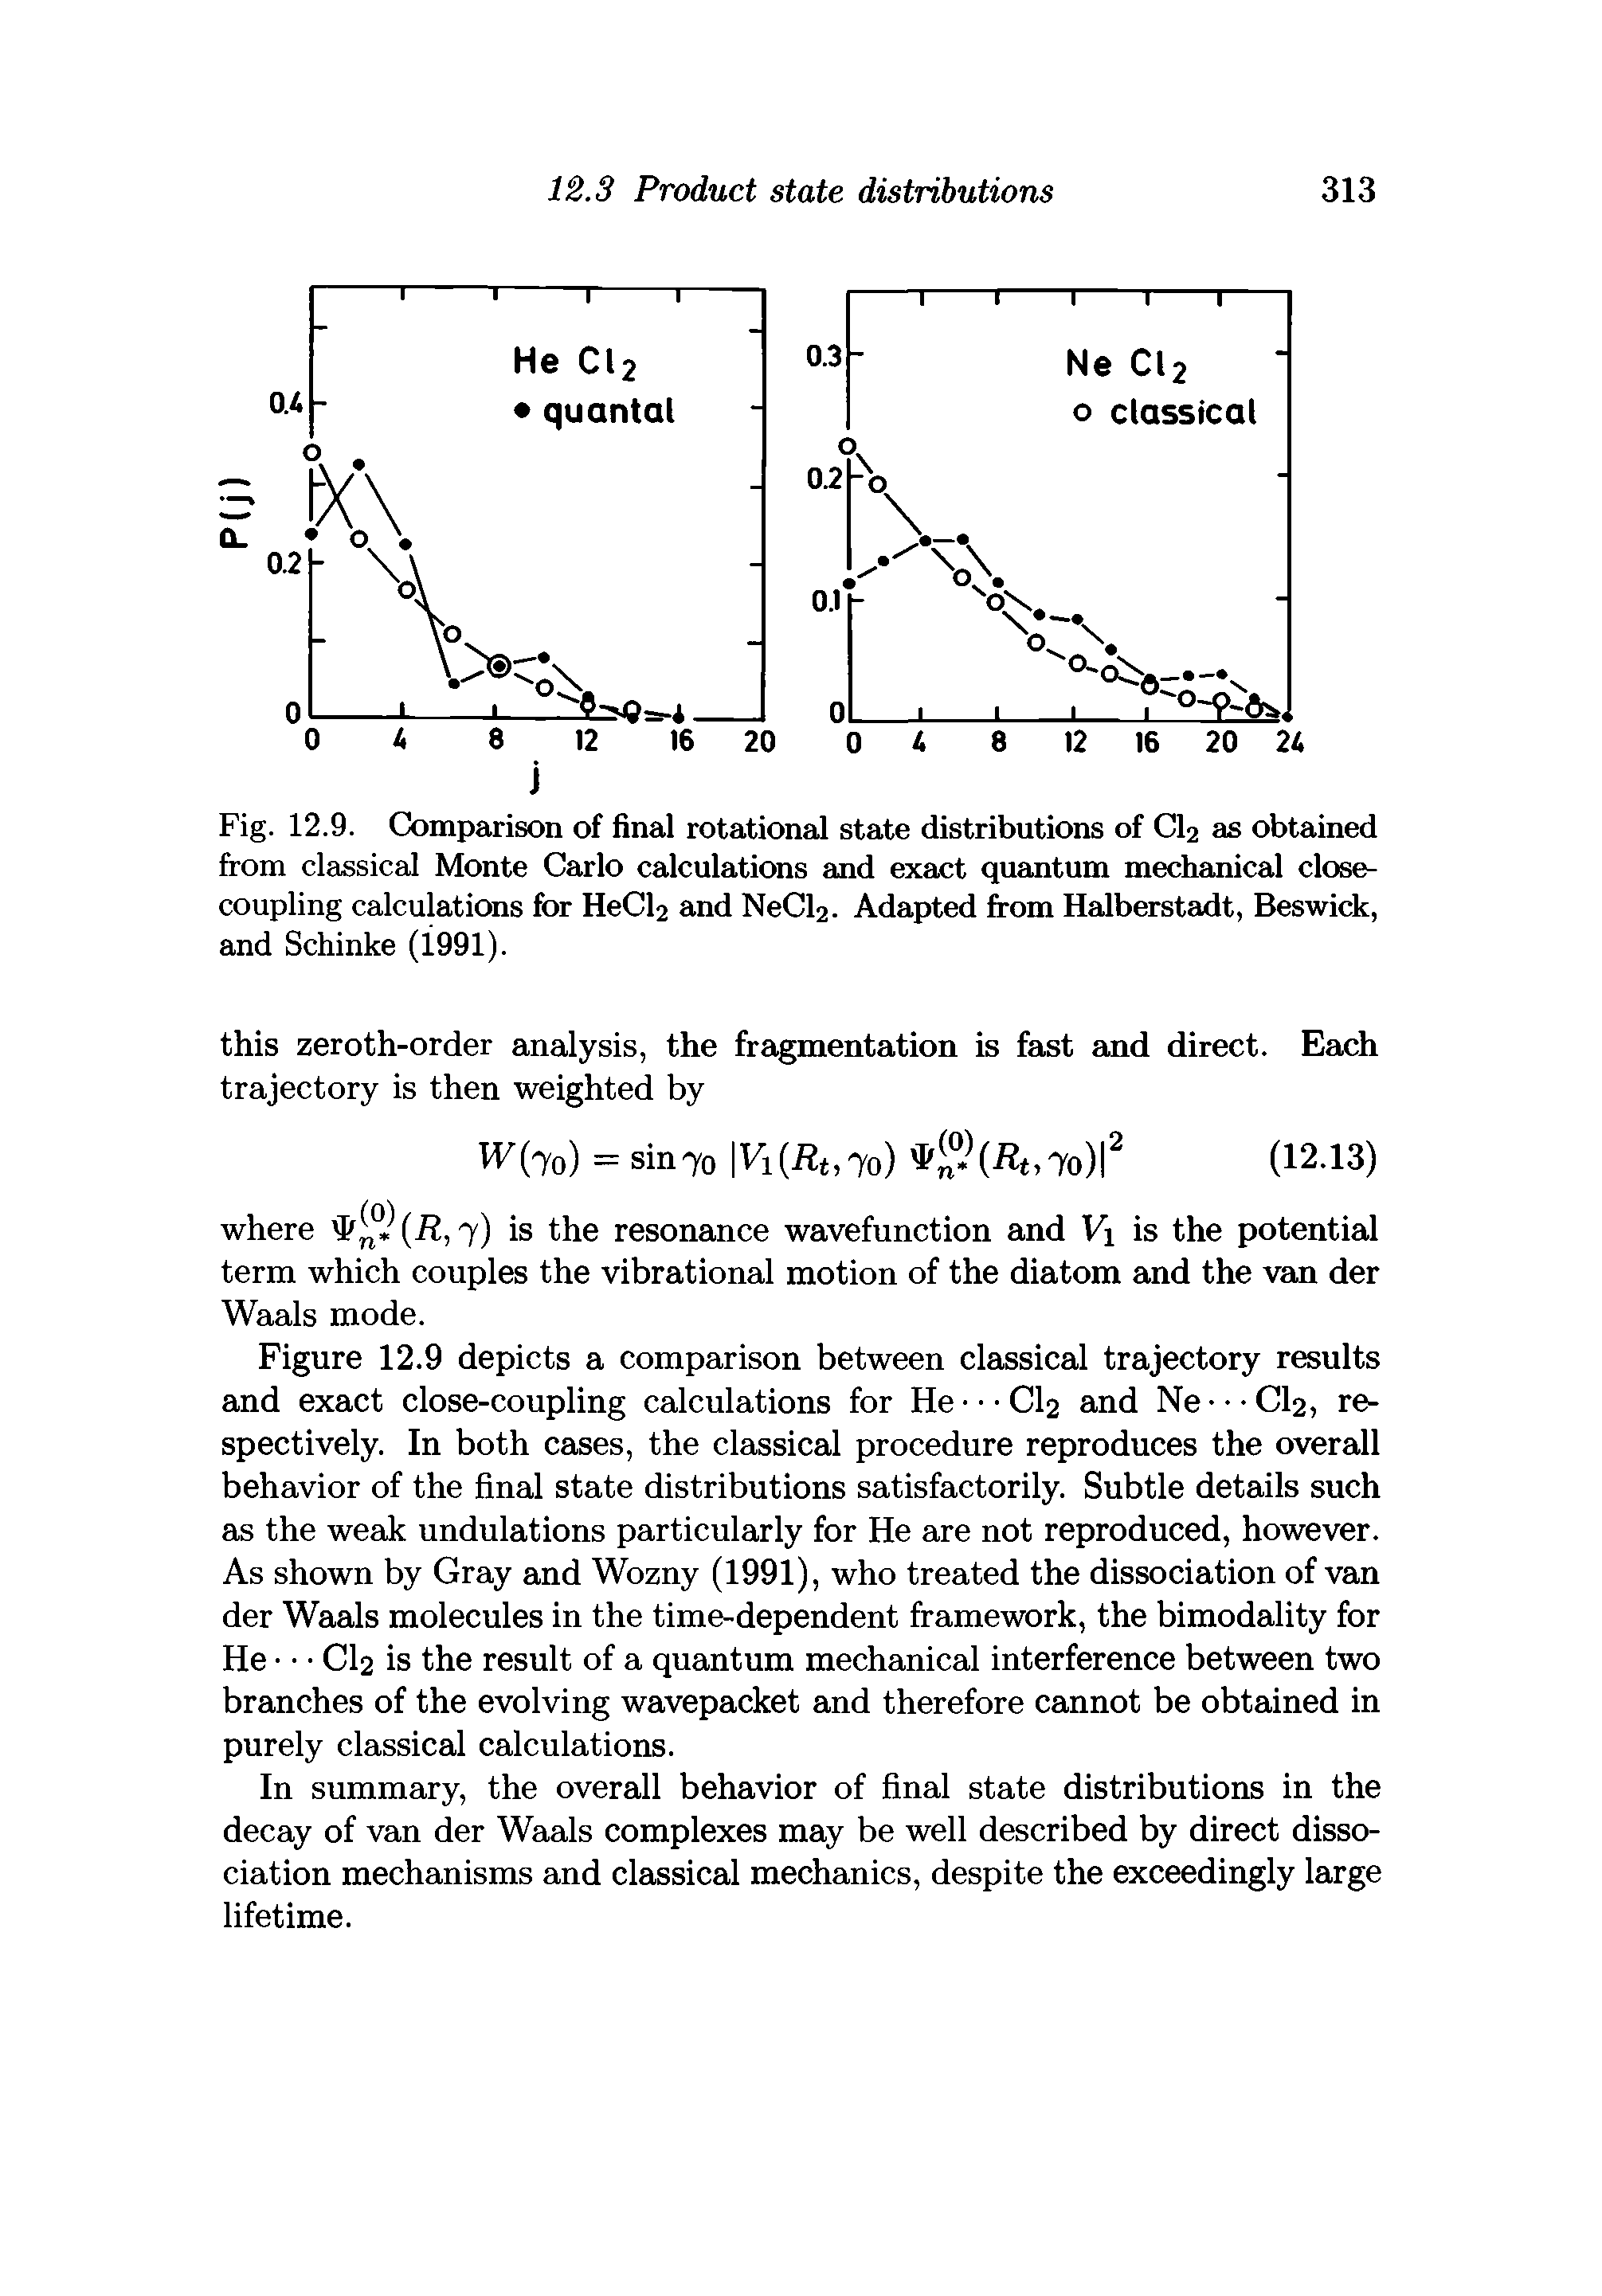 Fig. 12.9. Comparison of final rotational state distributions of CI2 as obtained from classical Monte Carlo calculations and exact quantum mechanical closecoupling calculations for HeCl2 and NeCl2. Adapted from Halberstadt, Beswick, and Schinke (1991).